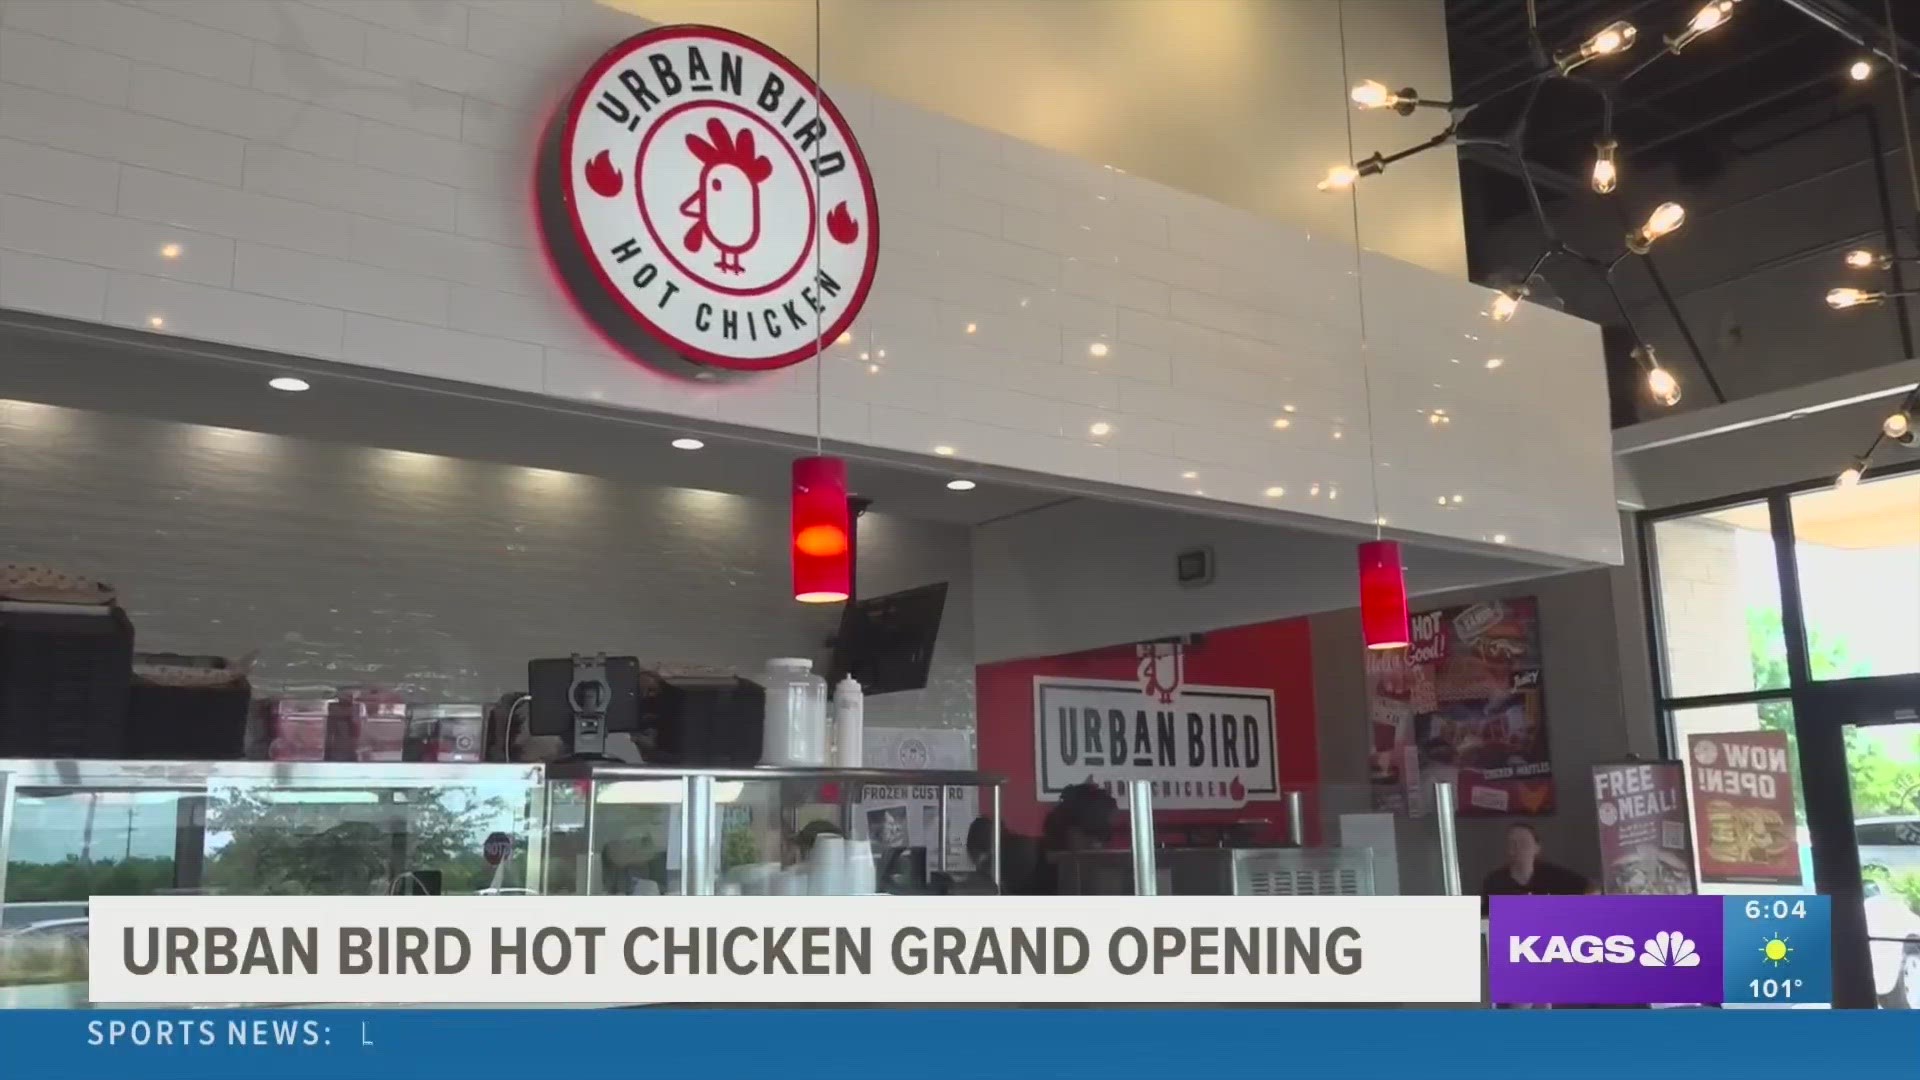 If you're looking for a new hot chicken place to try, Urban Bird just might be the place for you.